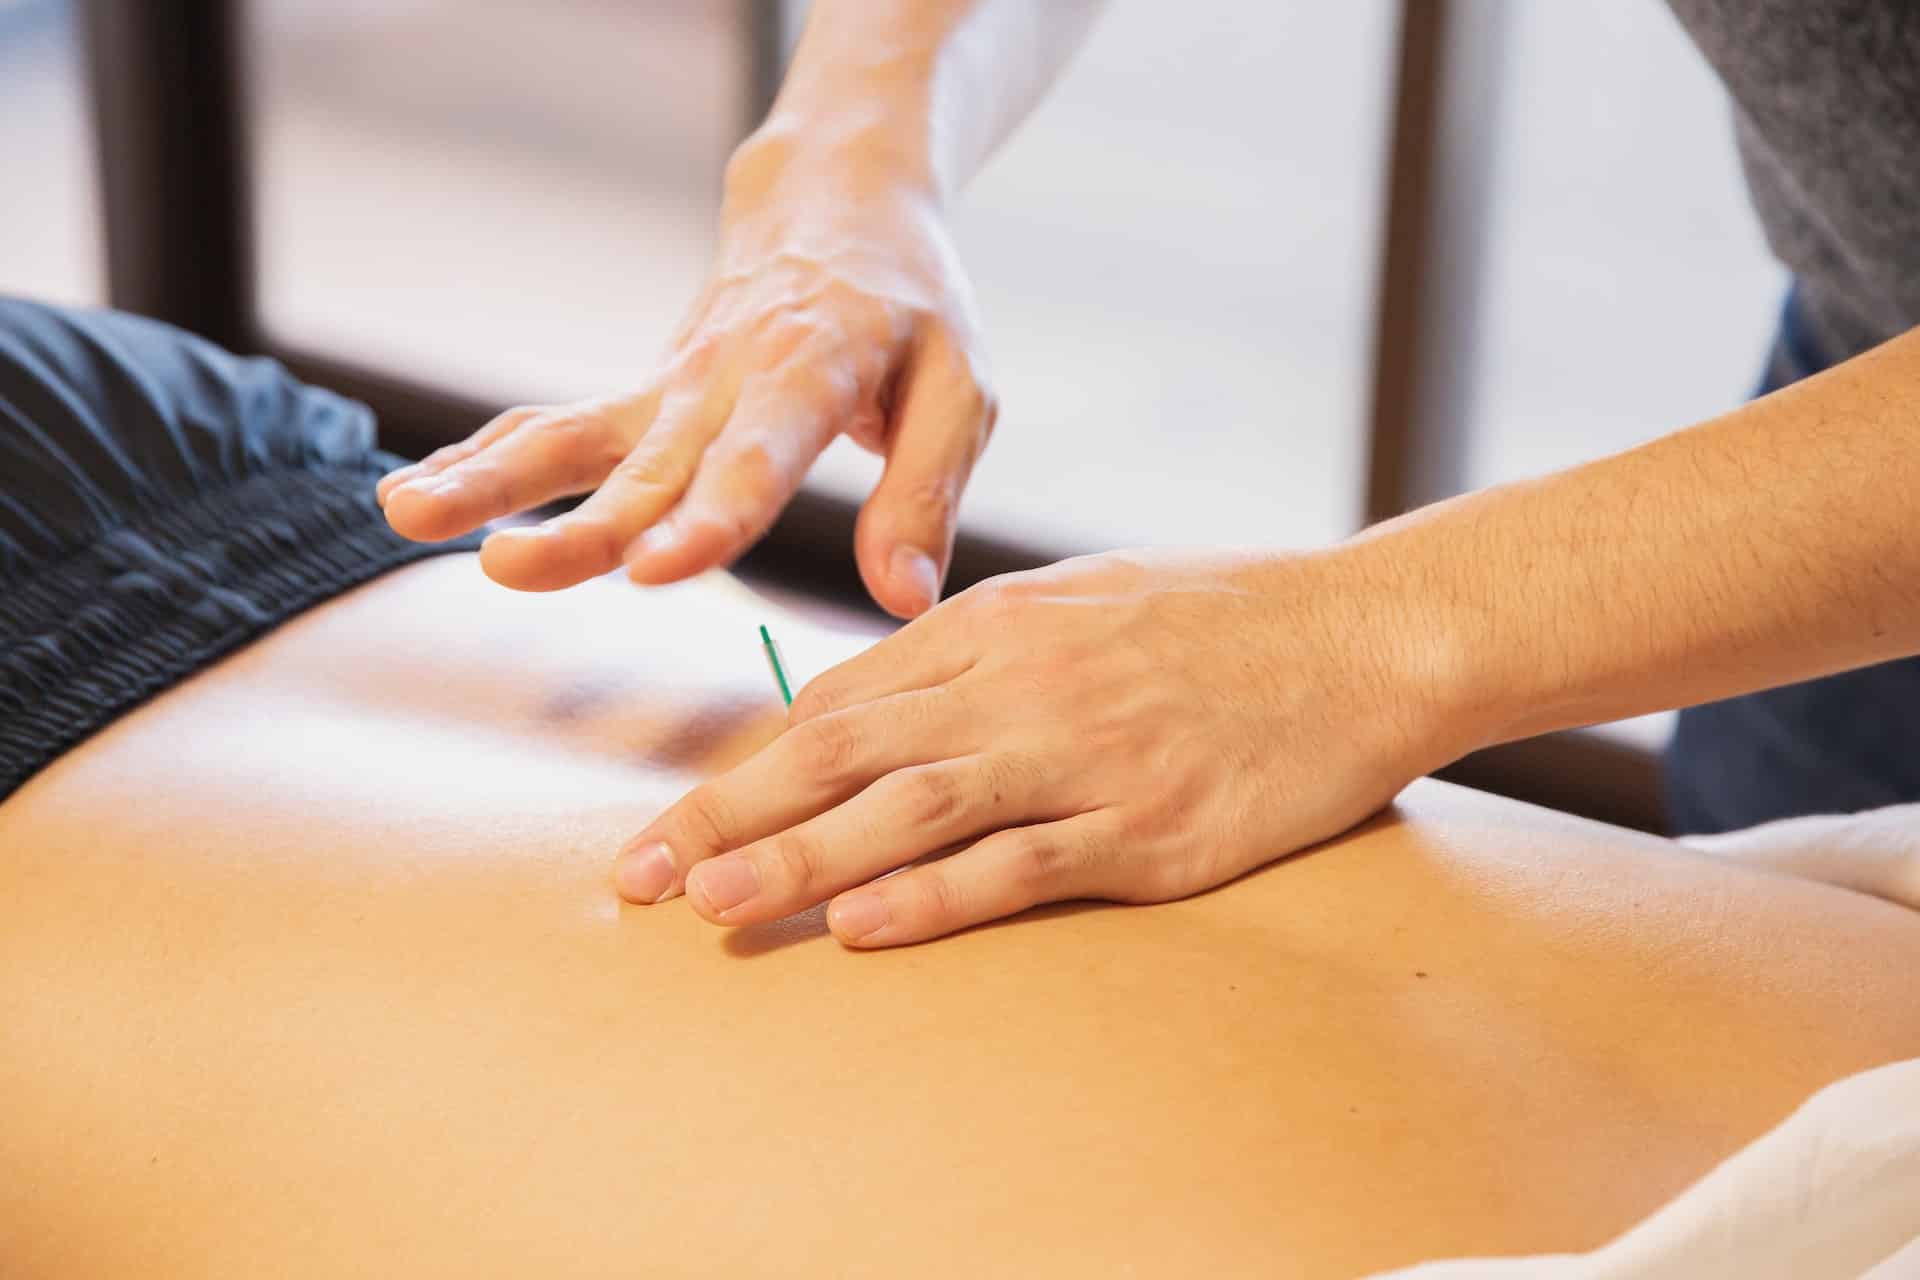 can acupuncture make back pain worse?